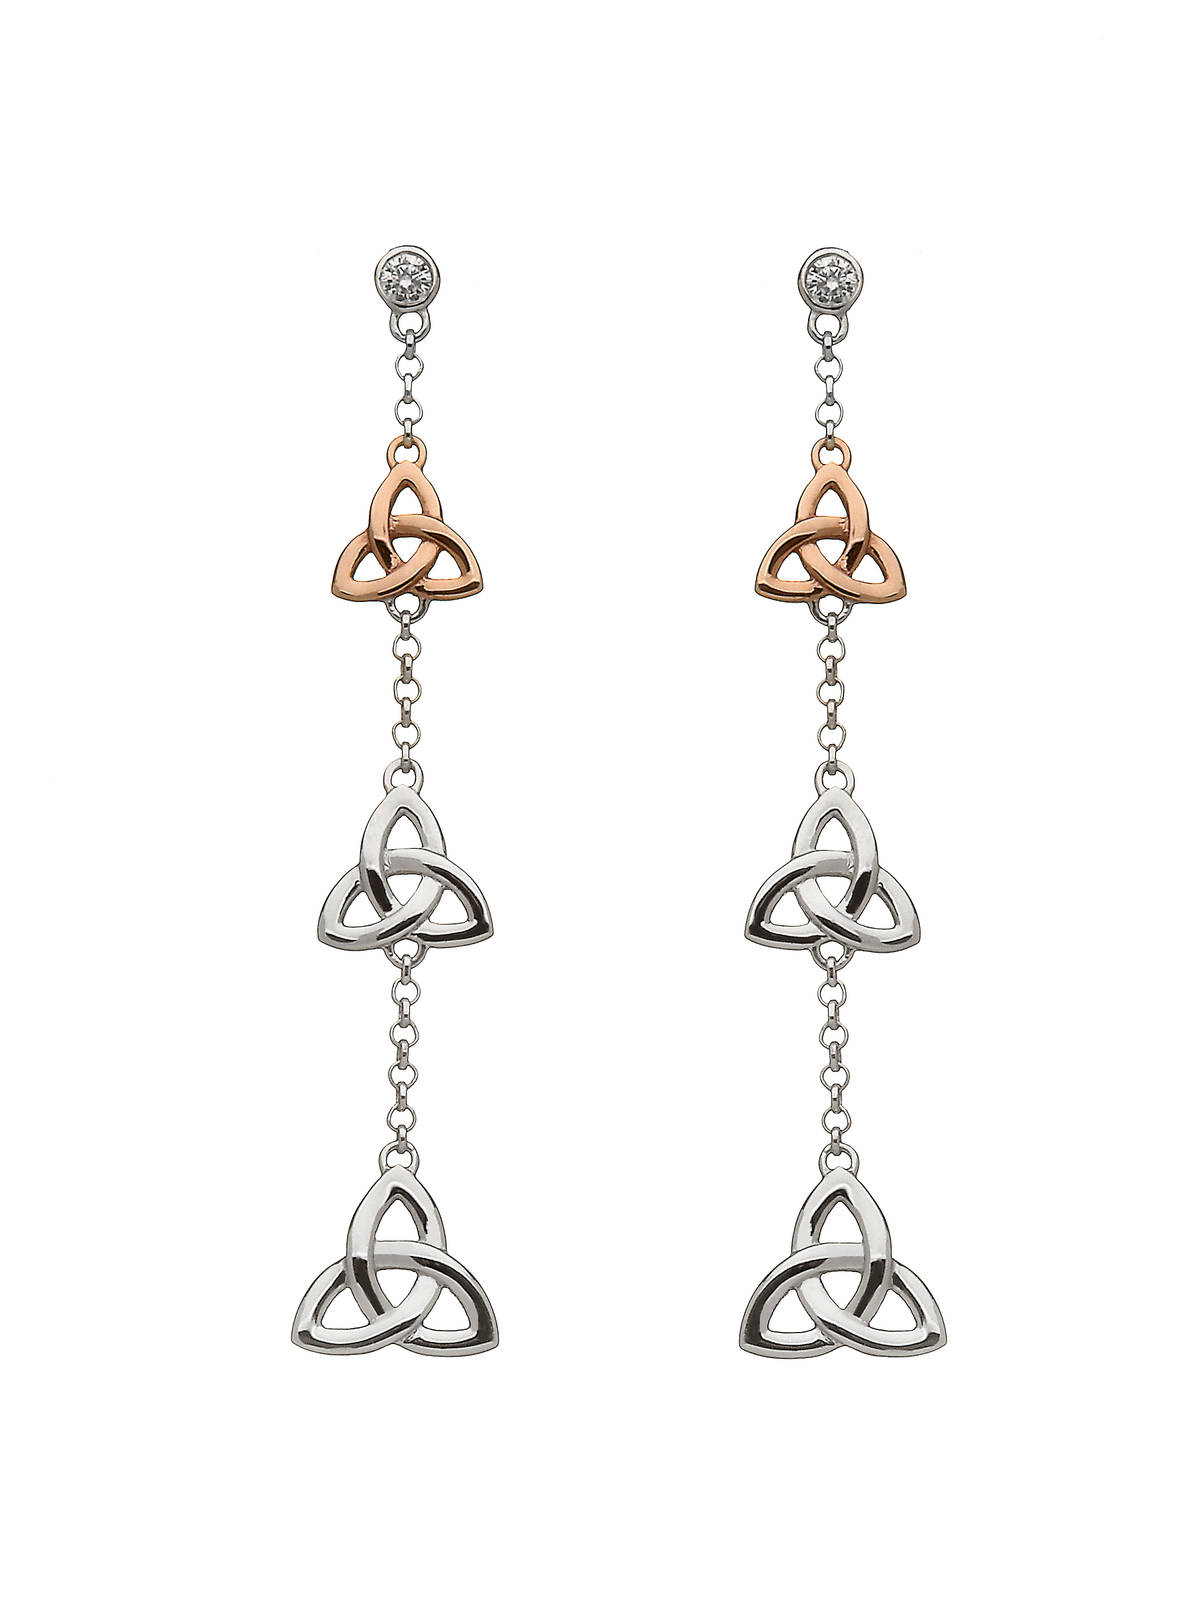 silver and rare Irish rose gold trinity knot 3 drop earrings with czs with top trinity knot made from gold.